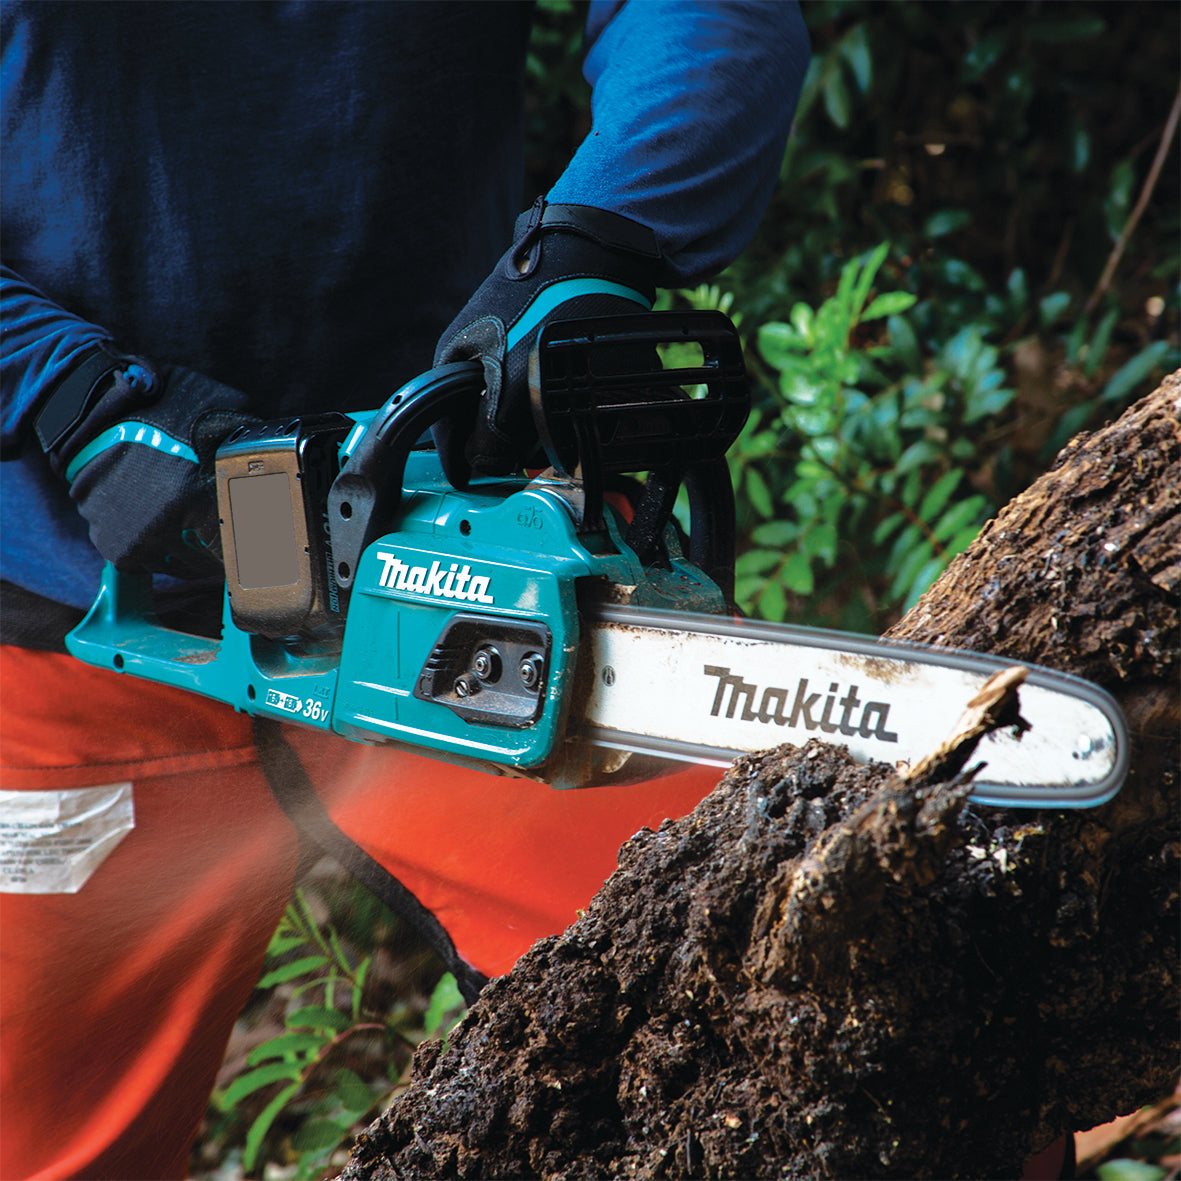 18Vx2 5.0Ah 350mm 14" Brushless Chainsaw Kit DUC355PT2 by Makita